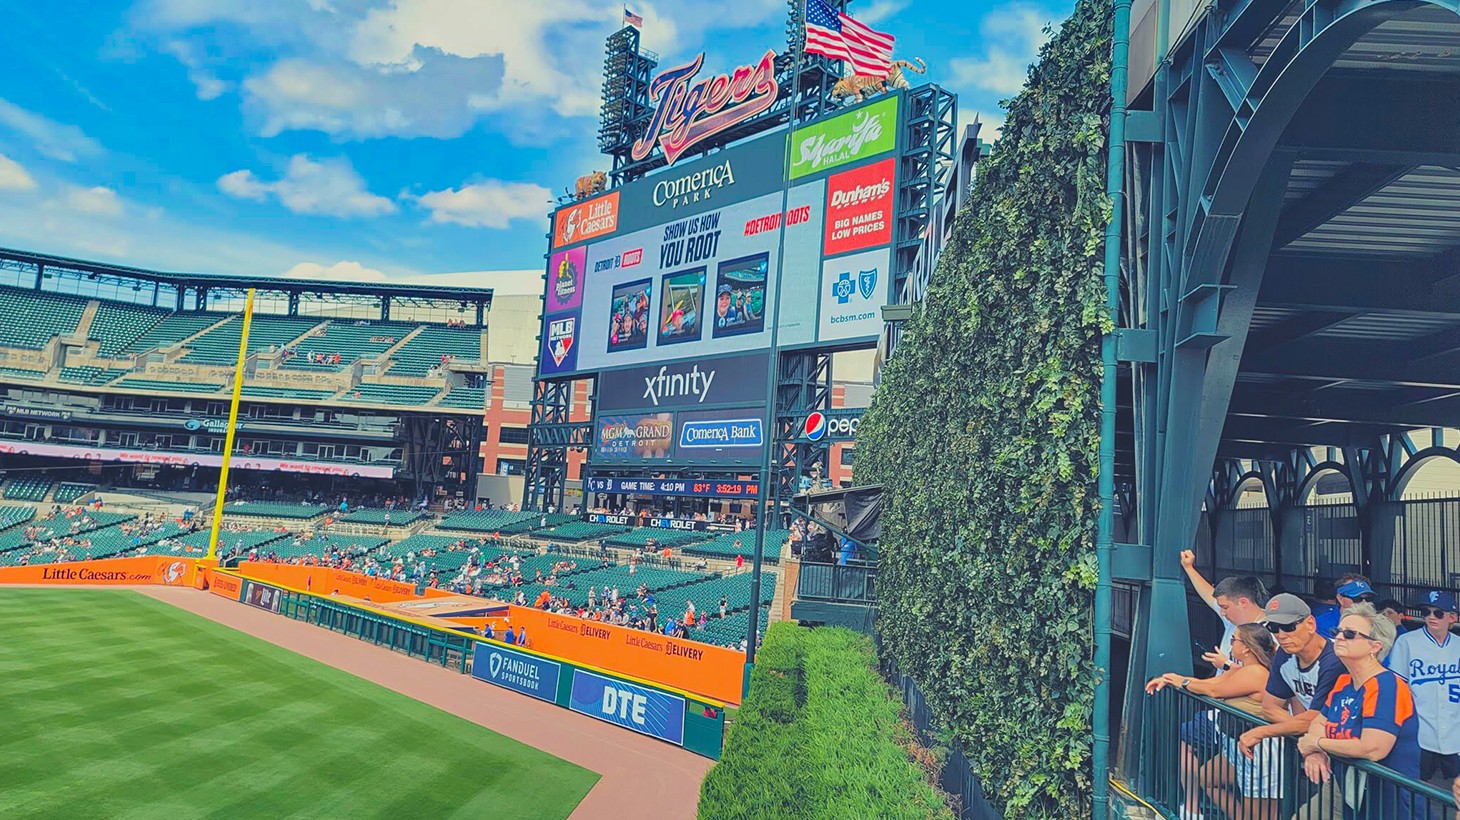 Athletics at Tigers Tickets in Detroit (Comerica Park) - Apr 6